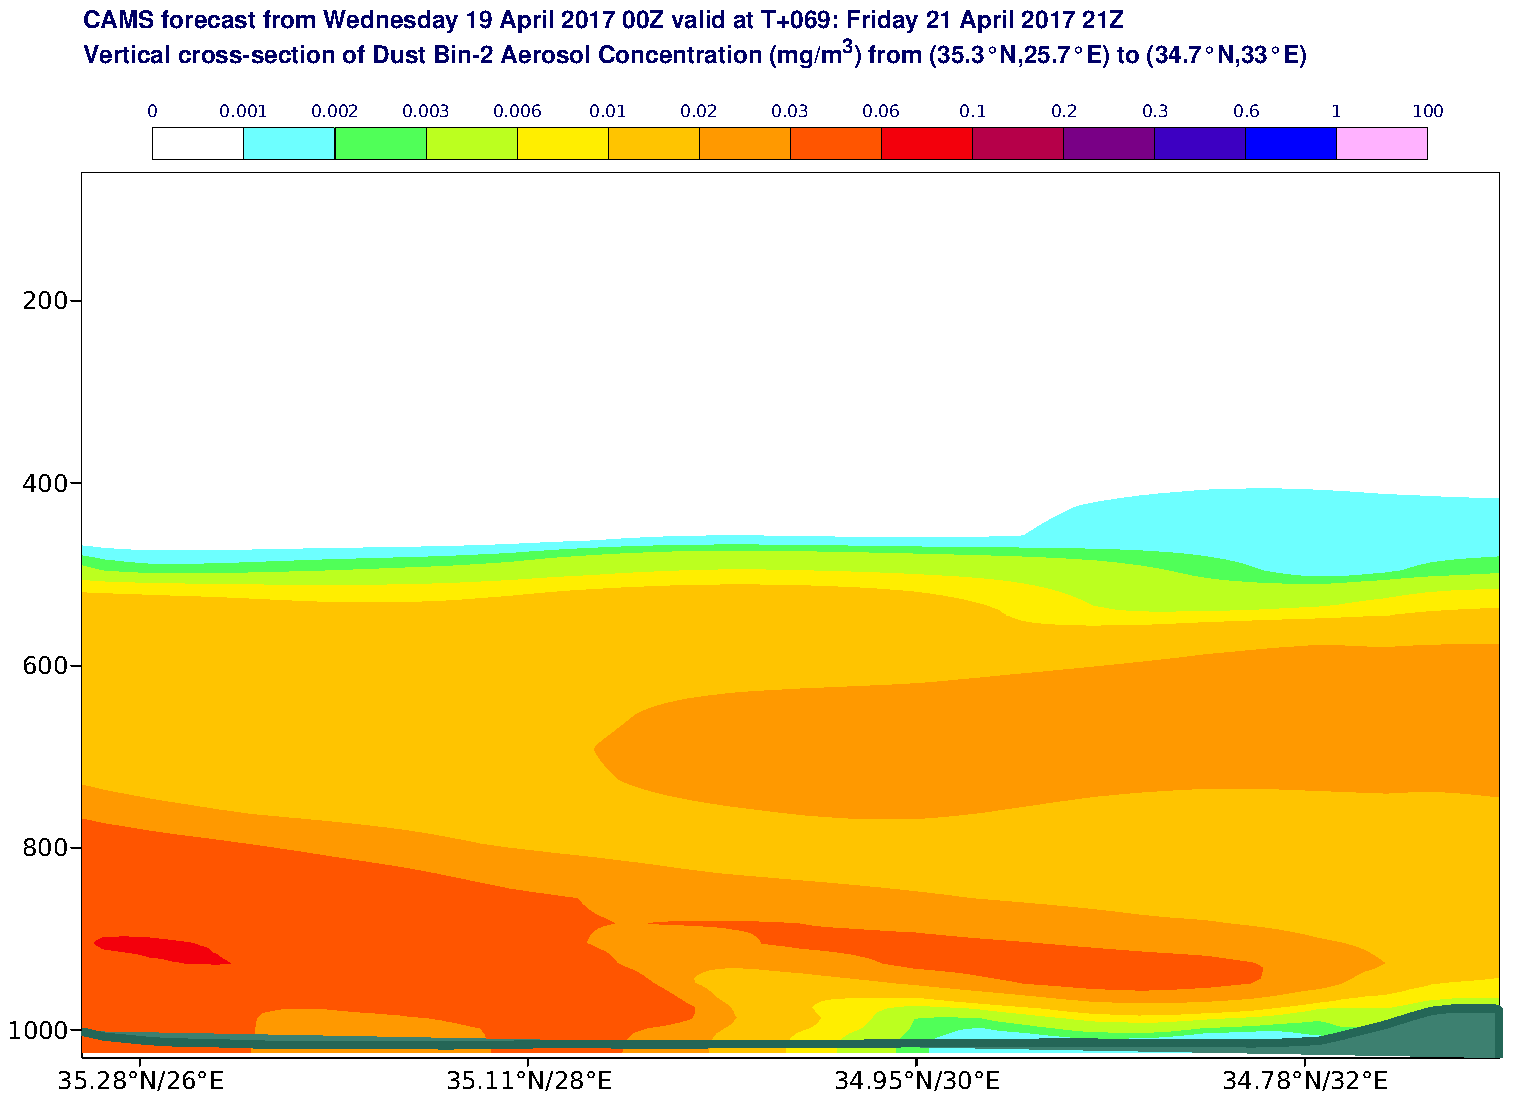 Vertical cross-section of Dust Bin-2 Aerosol Concentration (mg/m3) valid at T69 - 2017-04-21 21:00